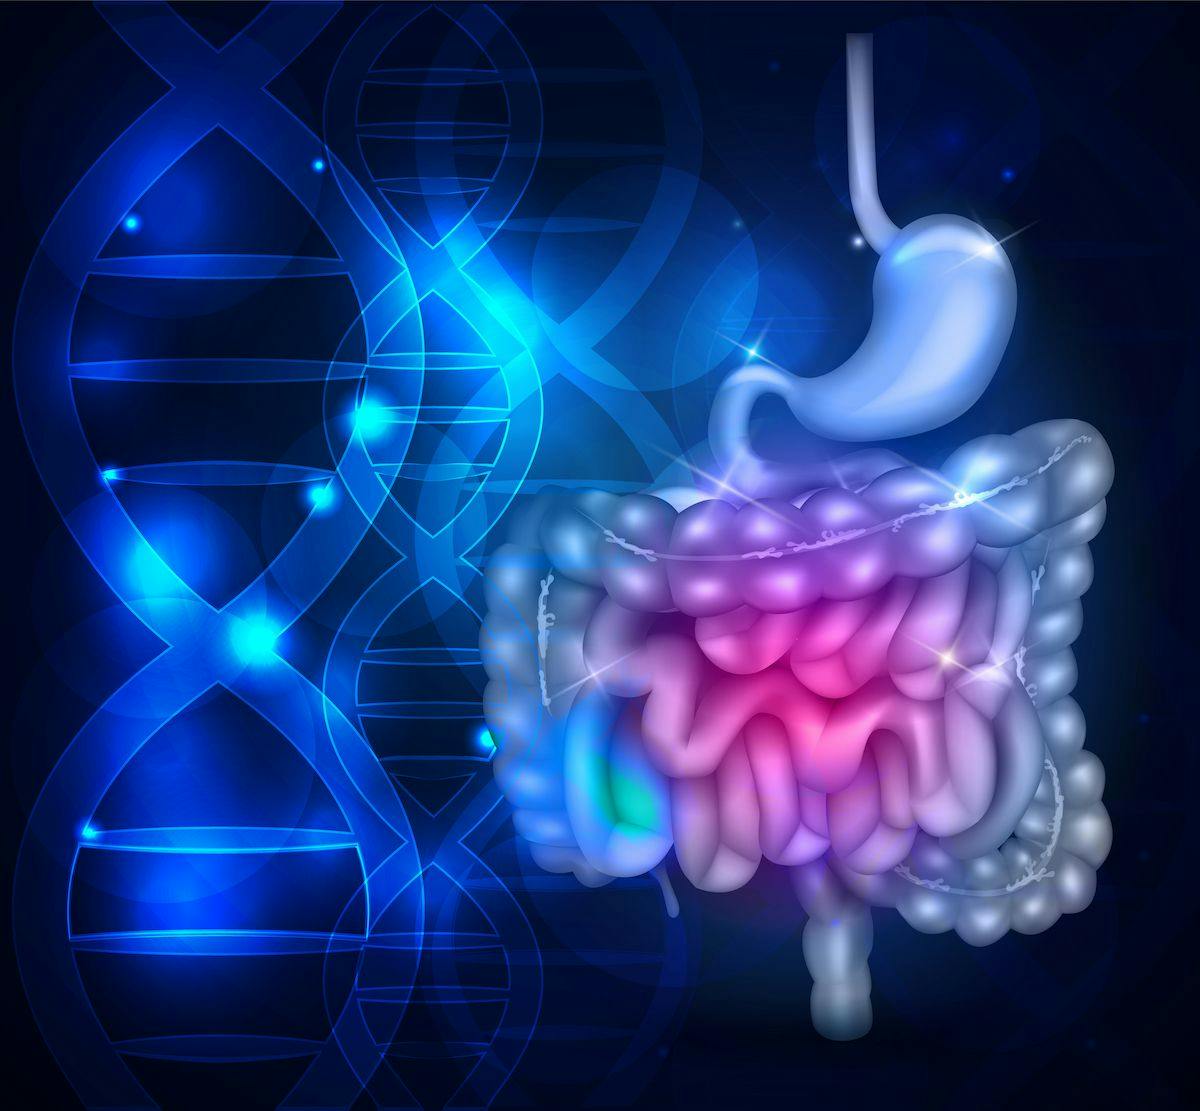 Patients with gastrointestinal stromal tumors may benefit from 68GA-RM26 PET/CT vs 18F-FDG, according to findings presented at the 2022 Society of Nuclear Medicine & Molecular Imaging Annual Meeting.